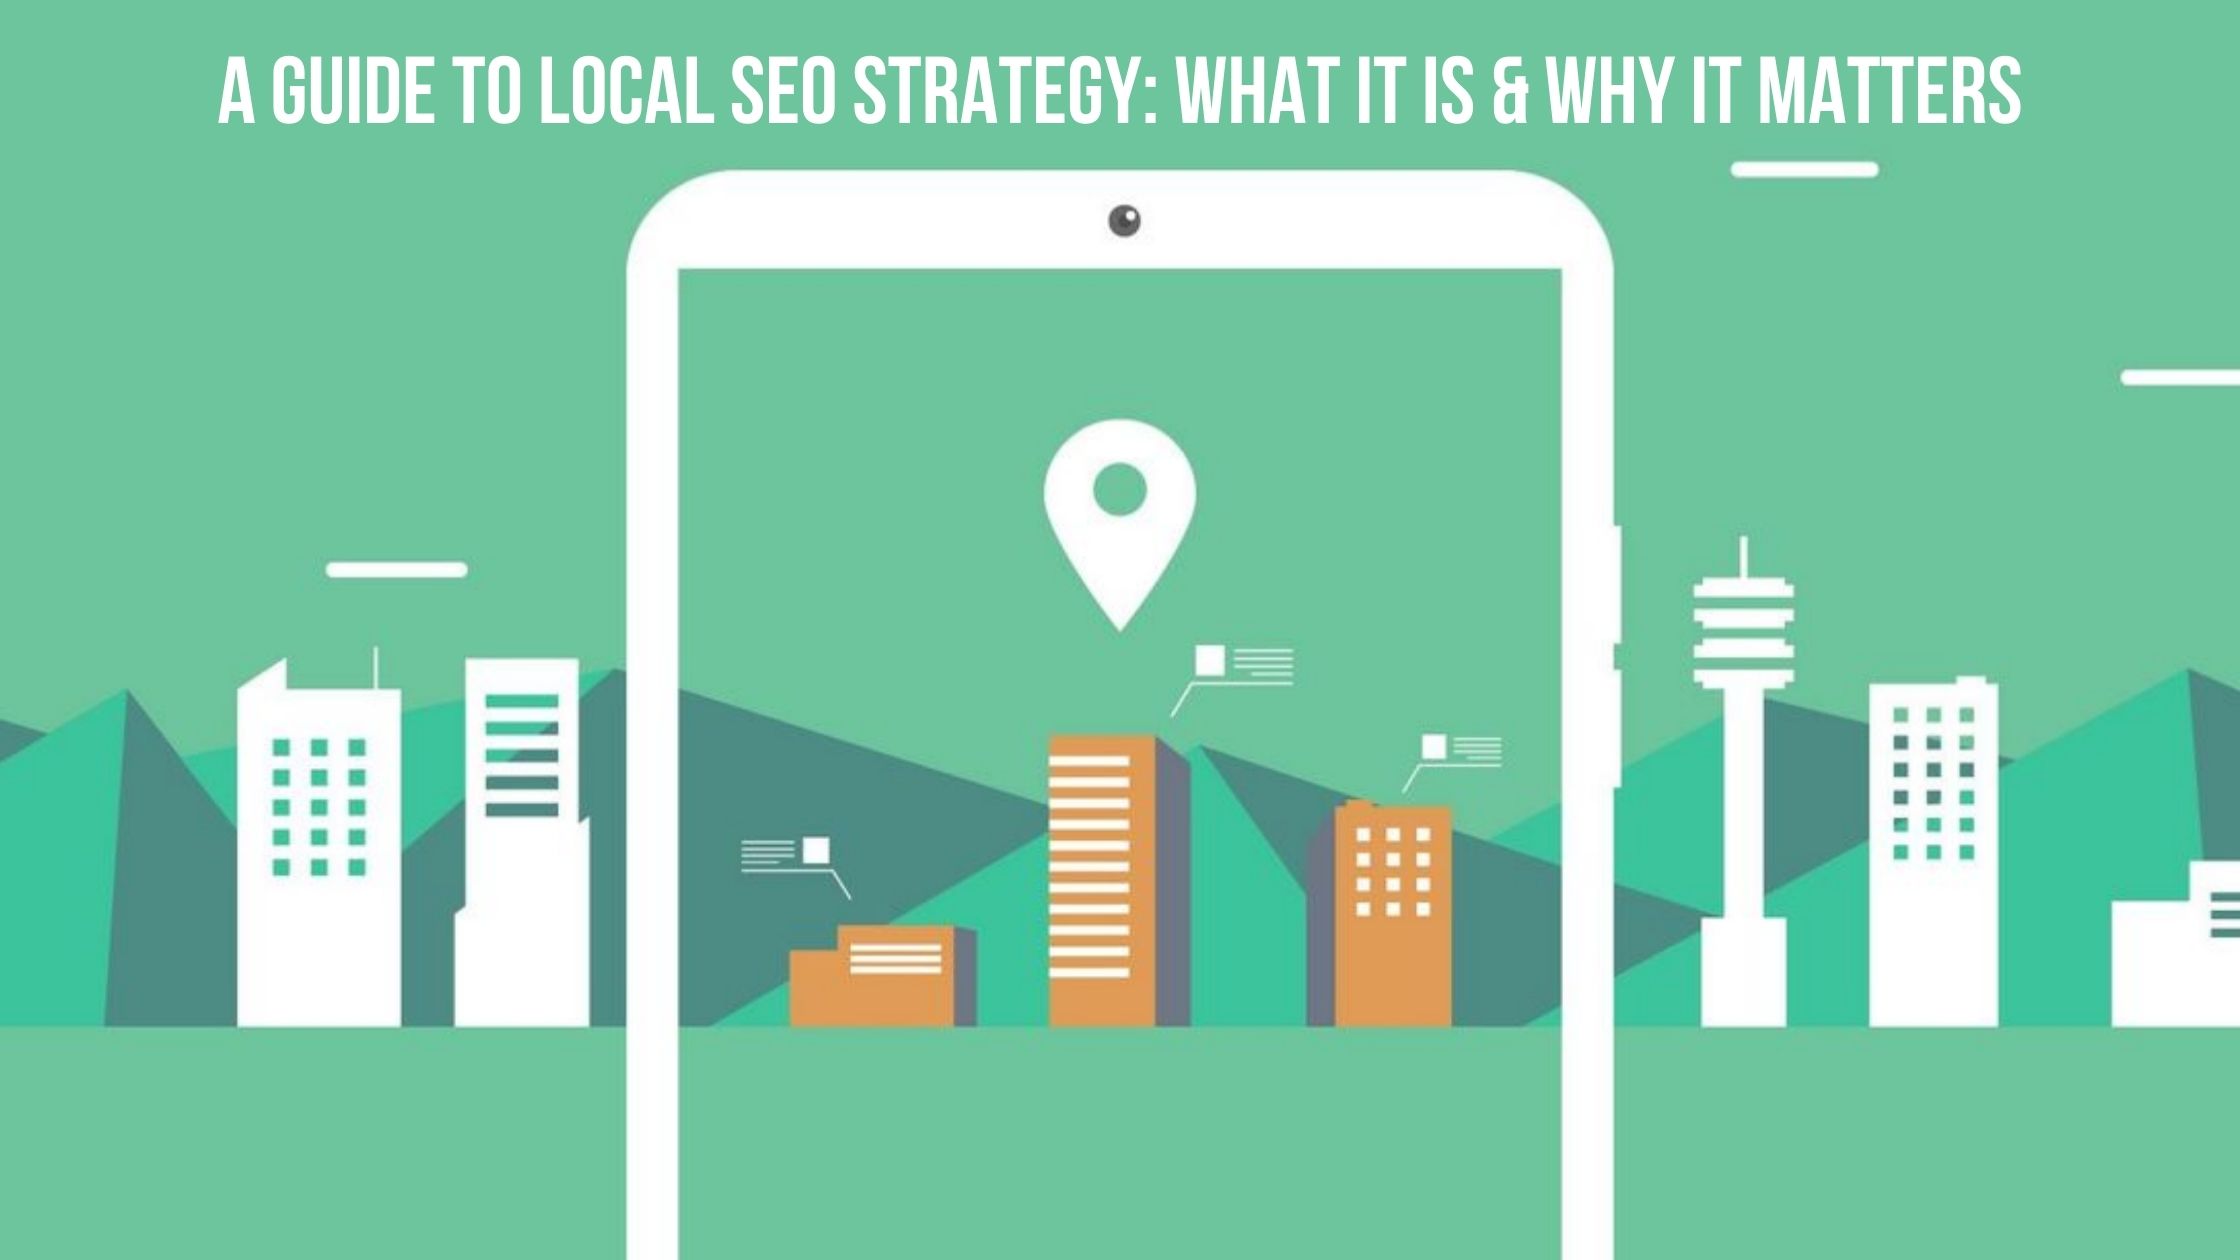 A Guide to Local SEO Strategy What It Is & Why It Matters